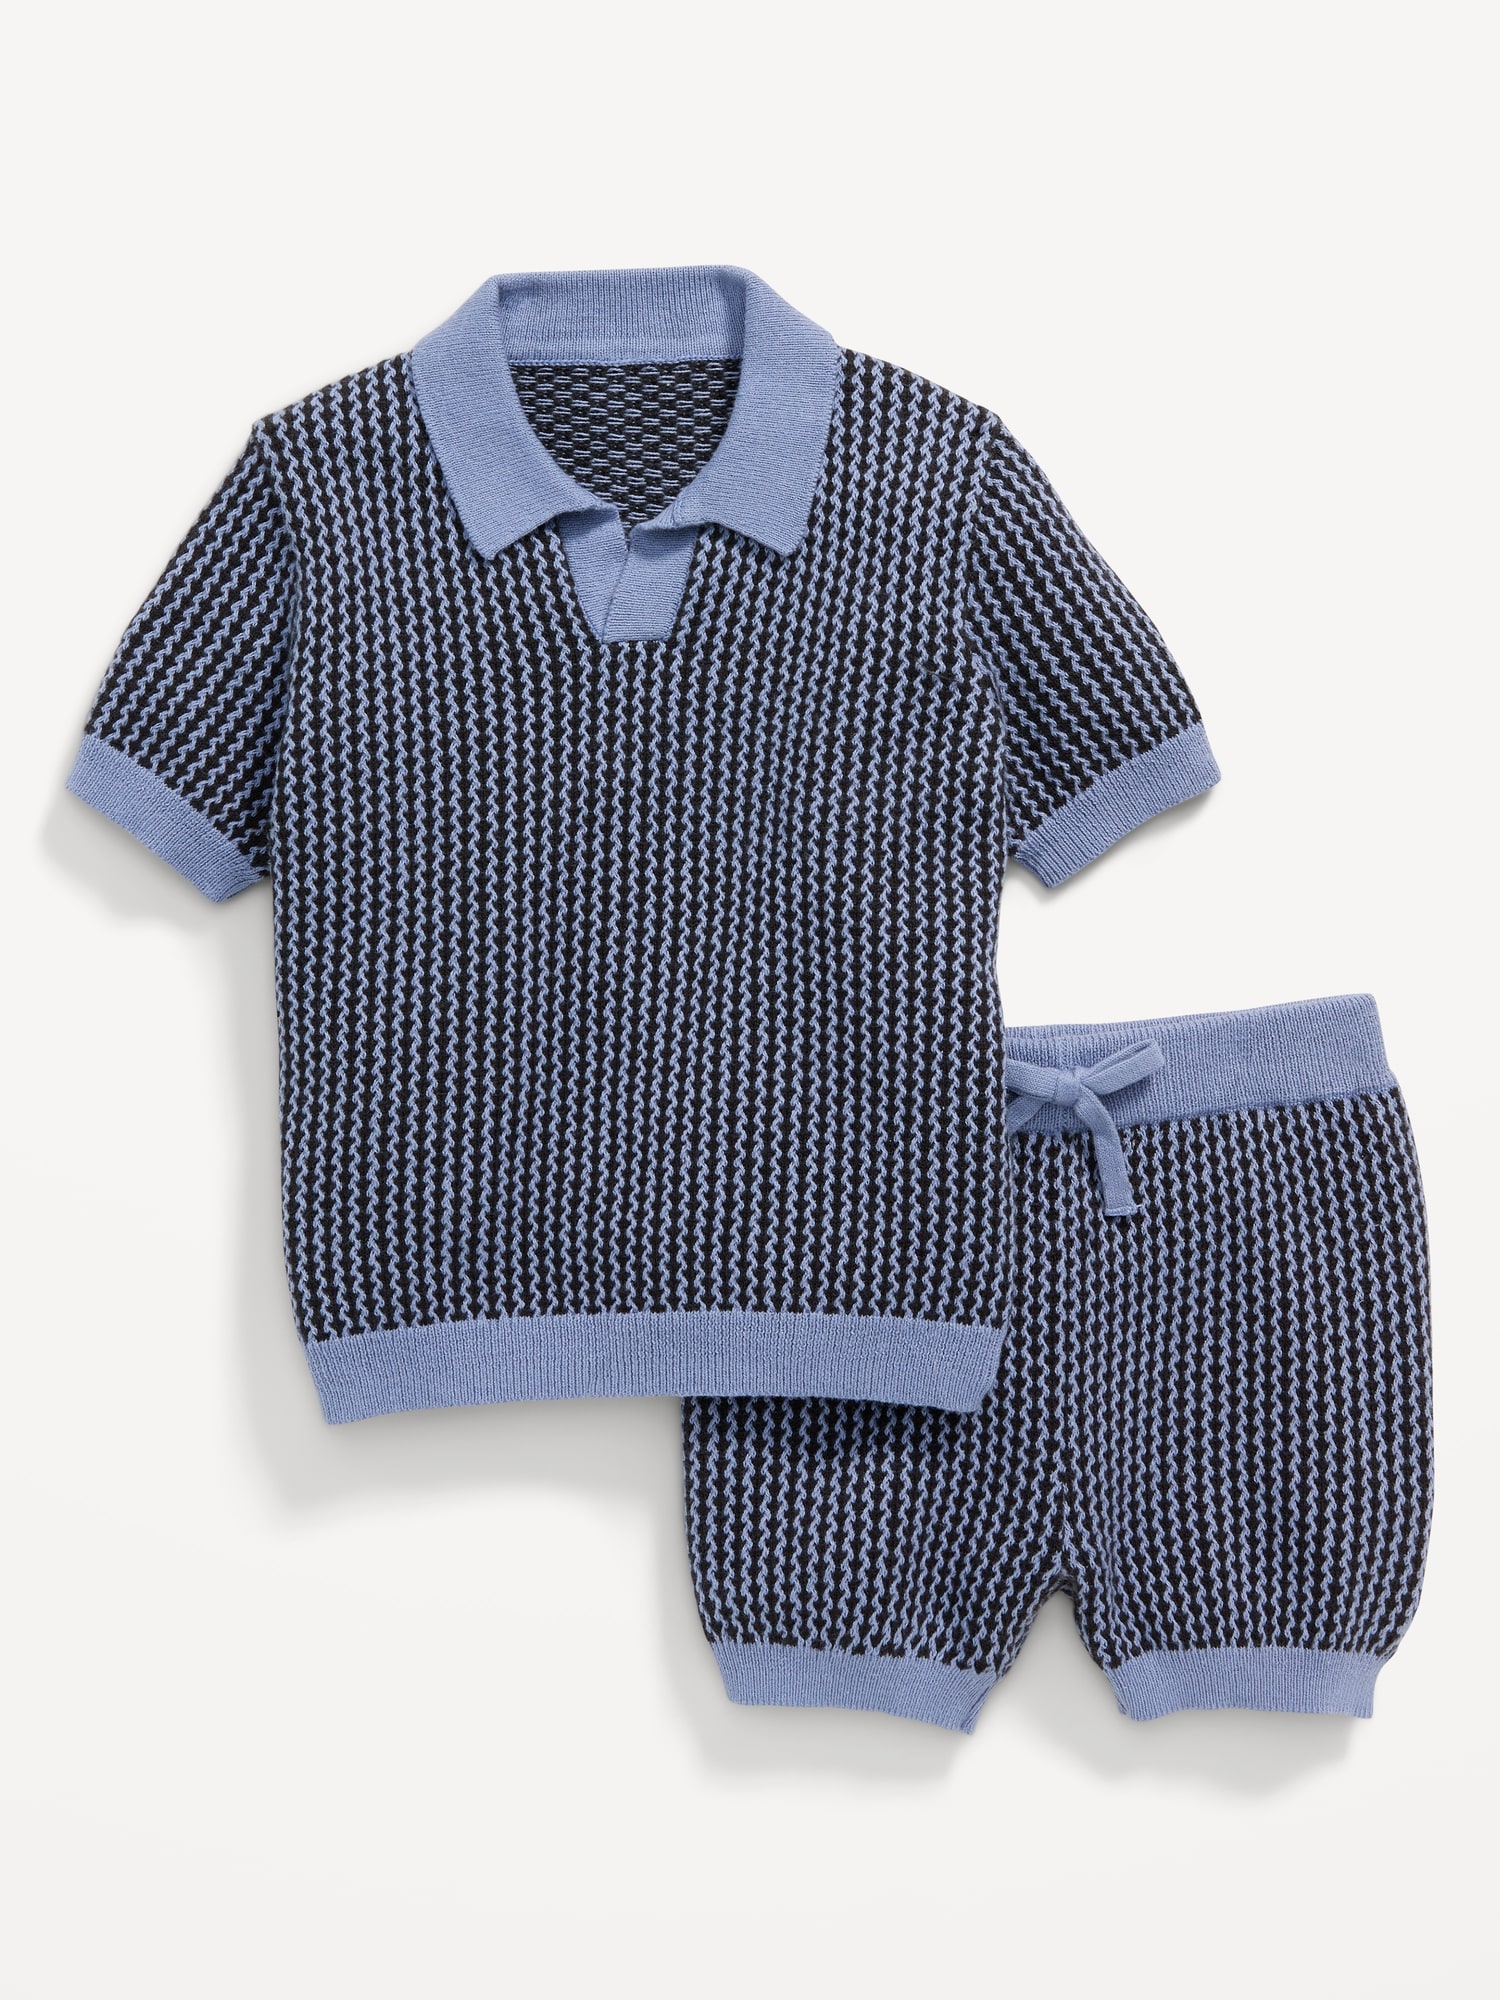 Printed Sweater-Knit Polo Shirt and Shorts Set for Baby